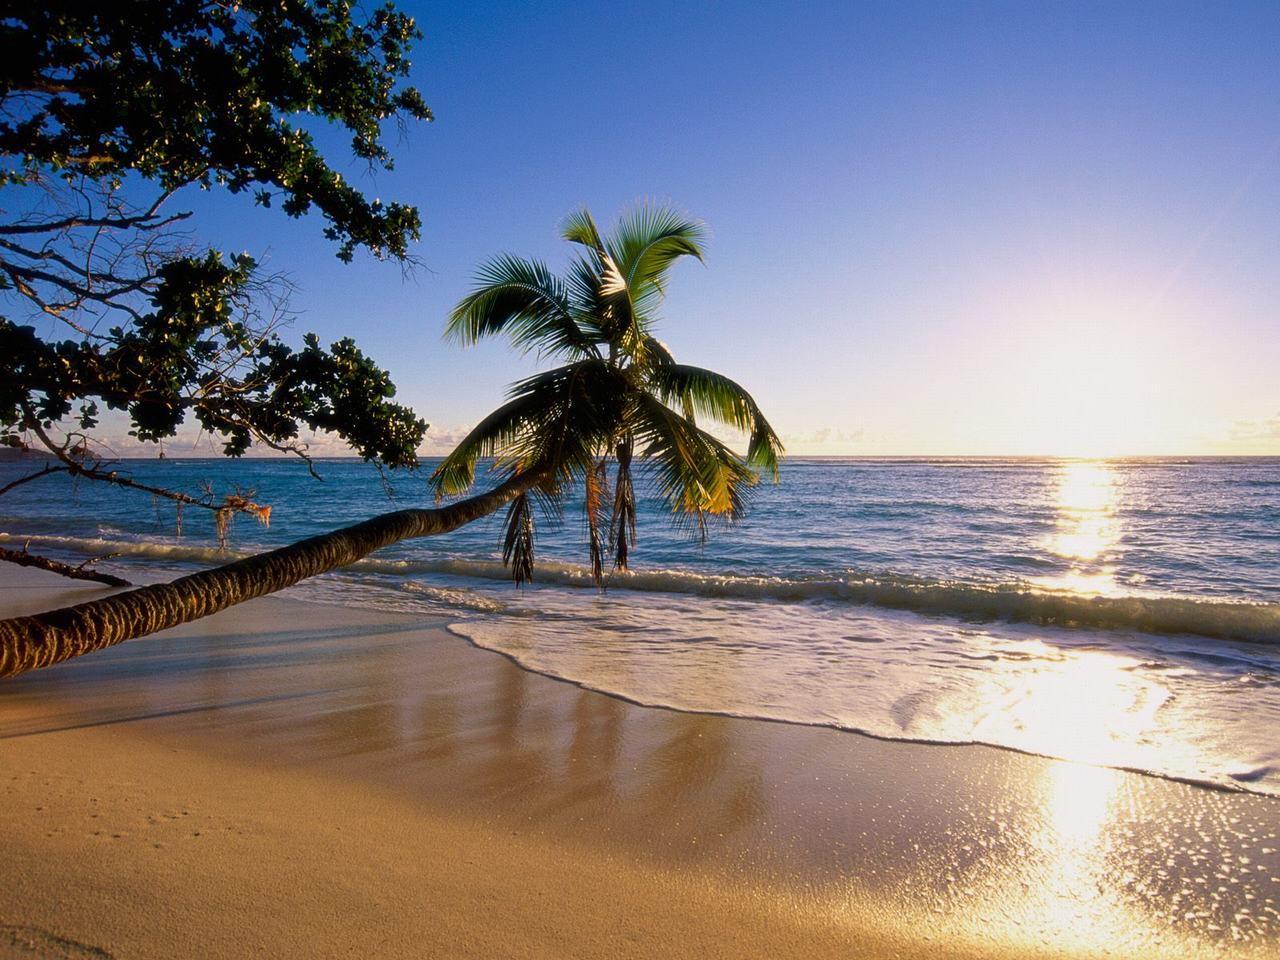 image For > Tropical Islands Beaches